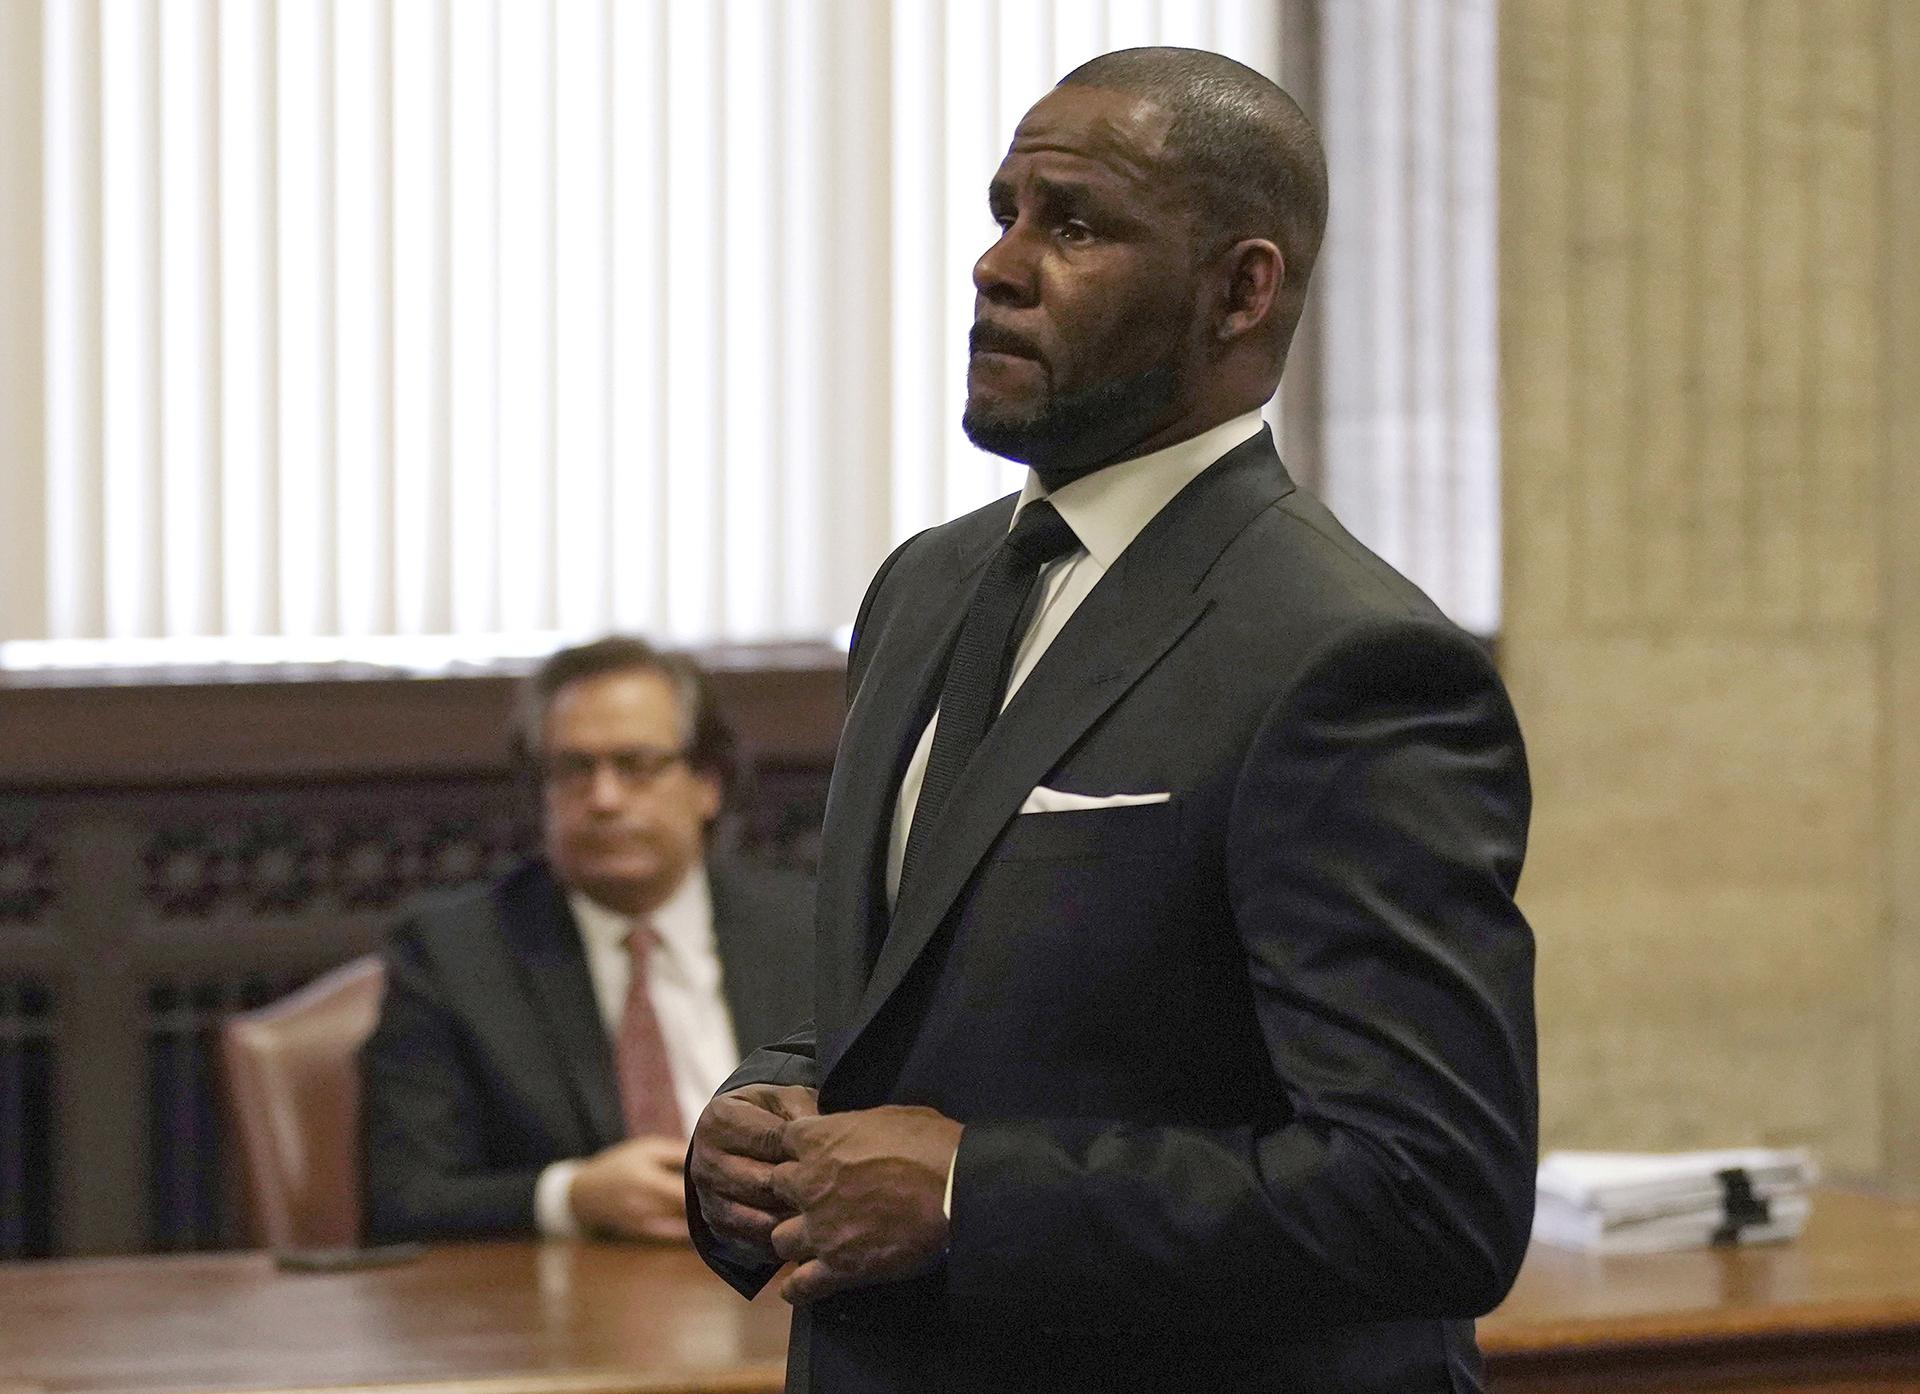 R. Kelly appears for a hearing at the Leighton Criminal Court Building on Friday, March 22, 2019 in Chicago. (E. Jason Wambsgans / Chicago Tribune via AP, Pool)